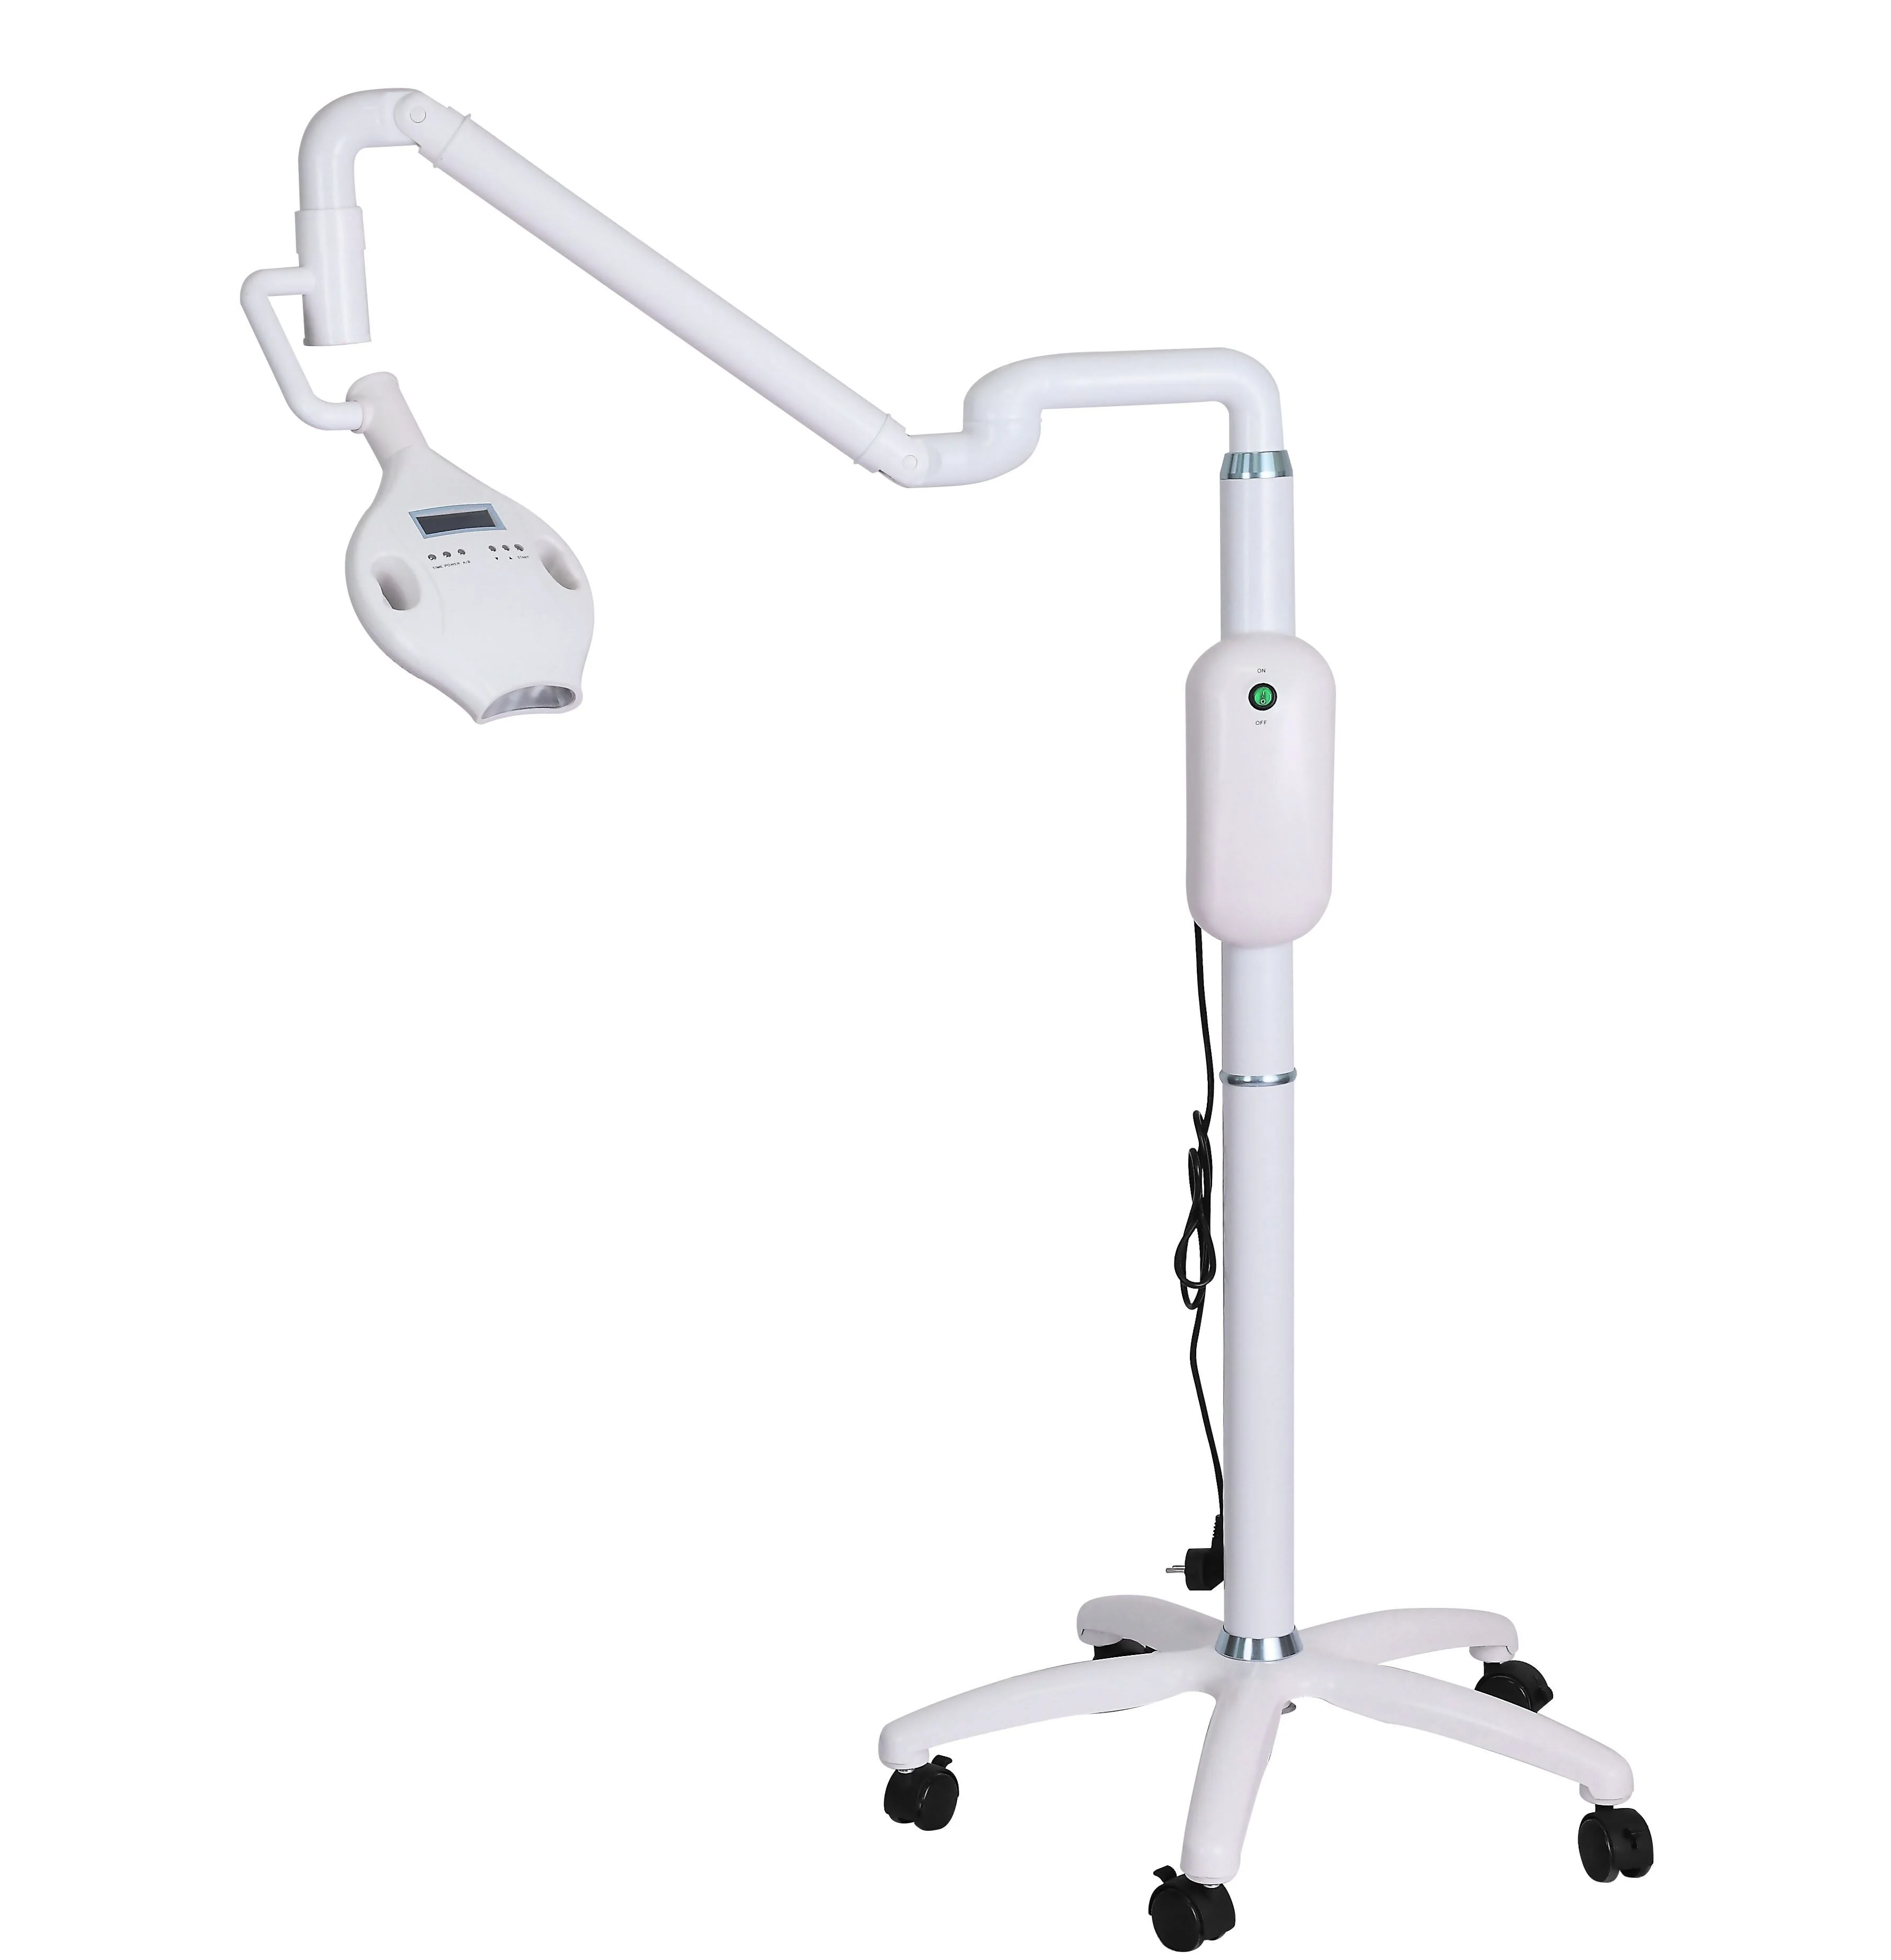 

Wholesale Dental LED Lamp Bleaching Teeth Whitening Machine for Beauty Salon Or Clinic Use, White color